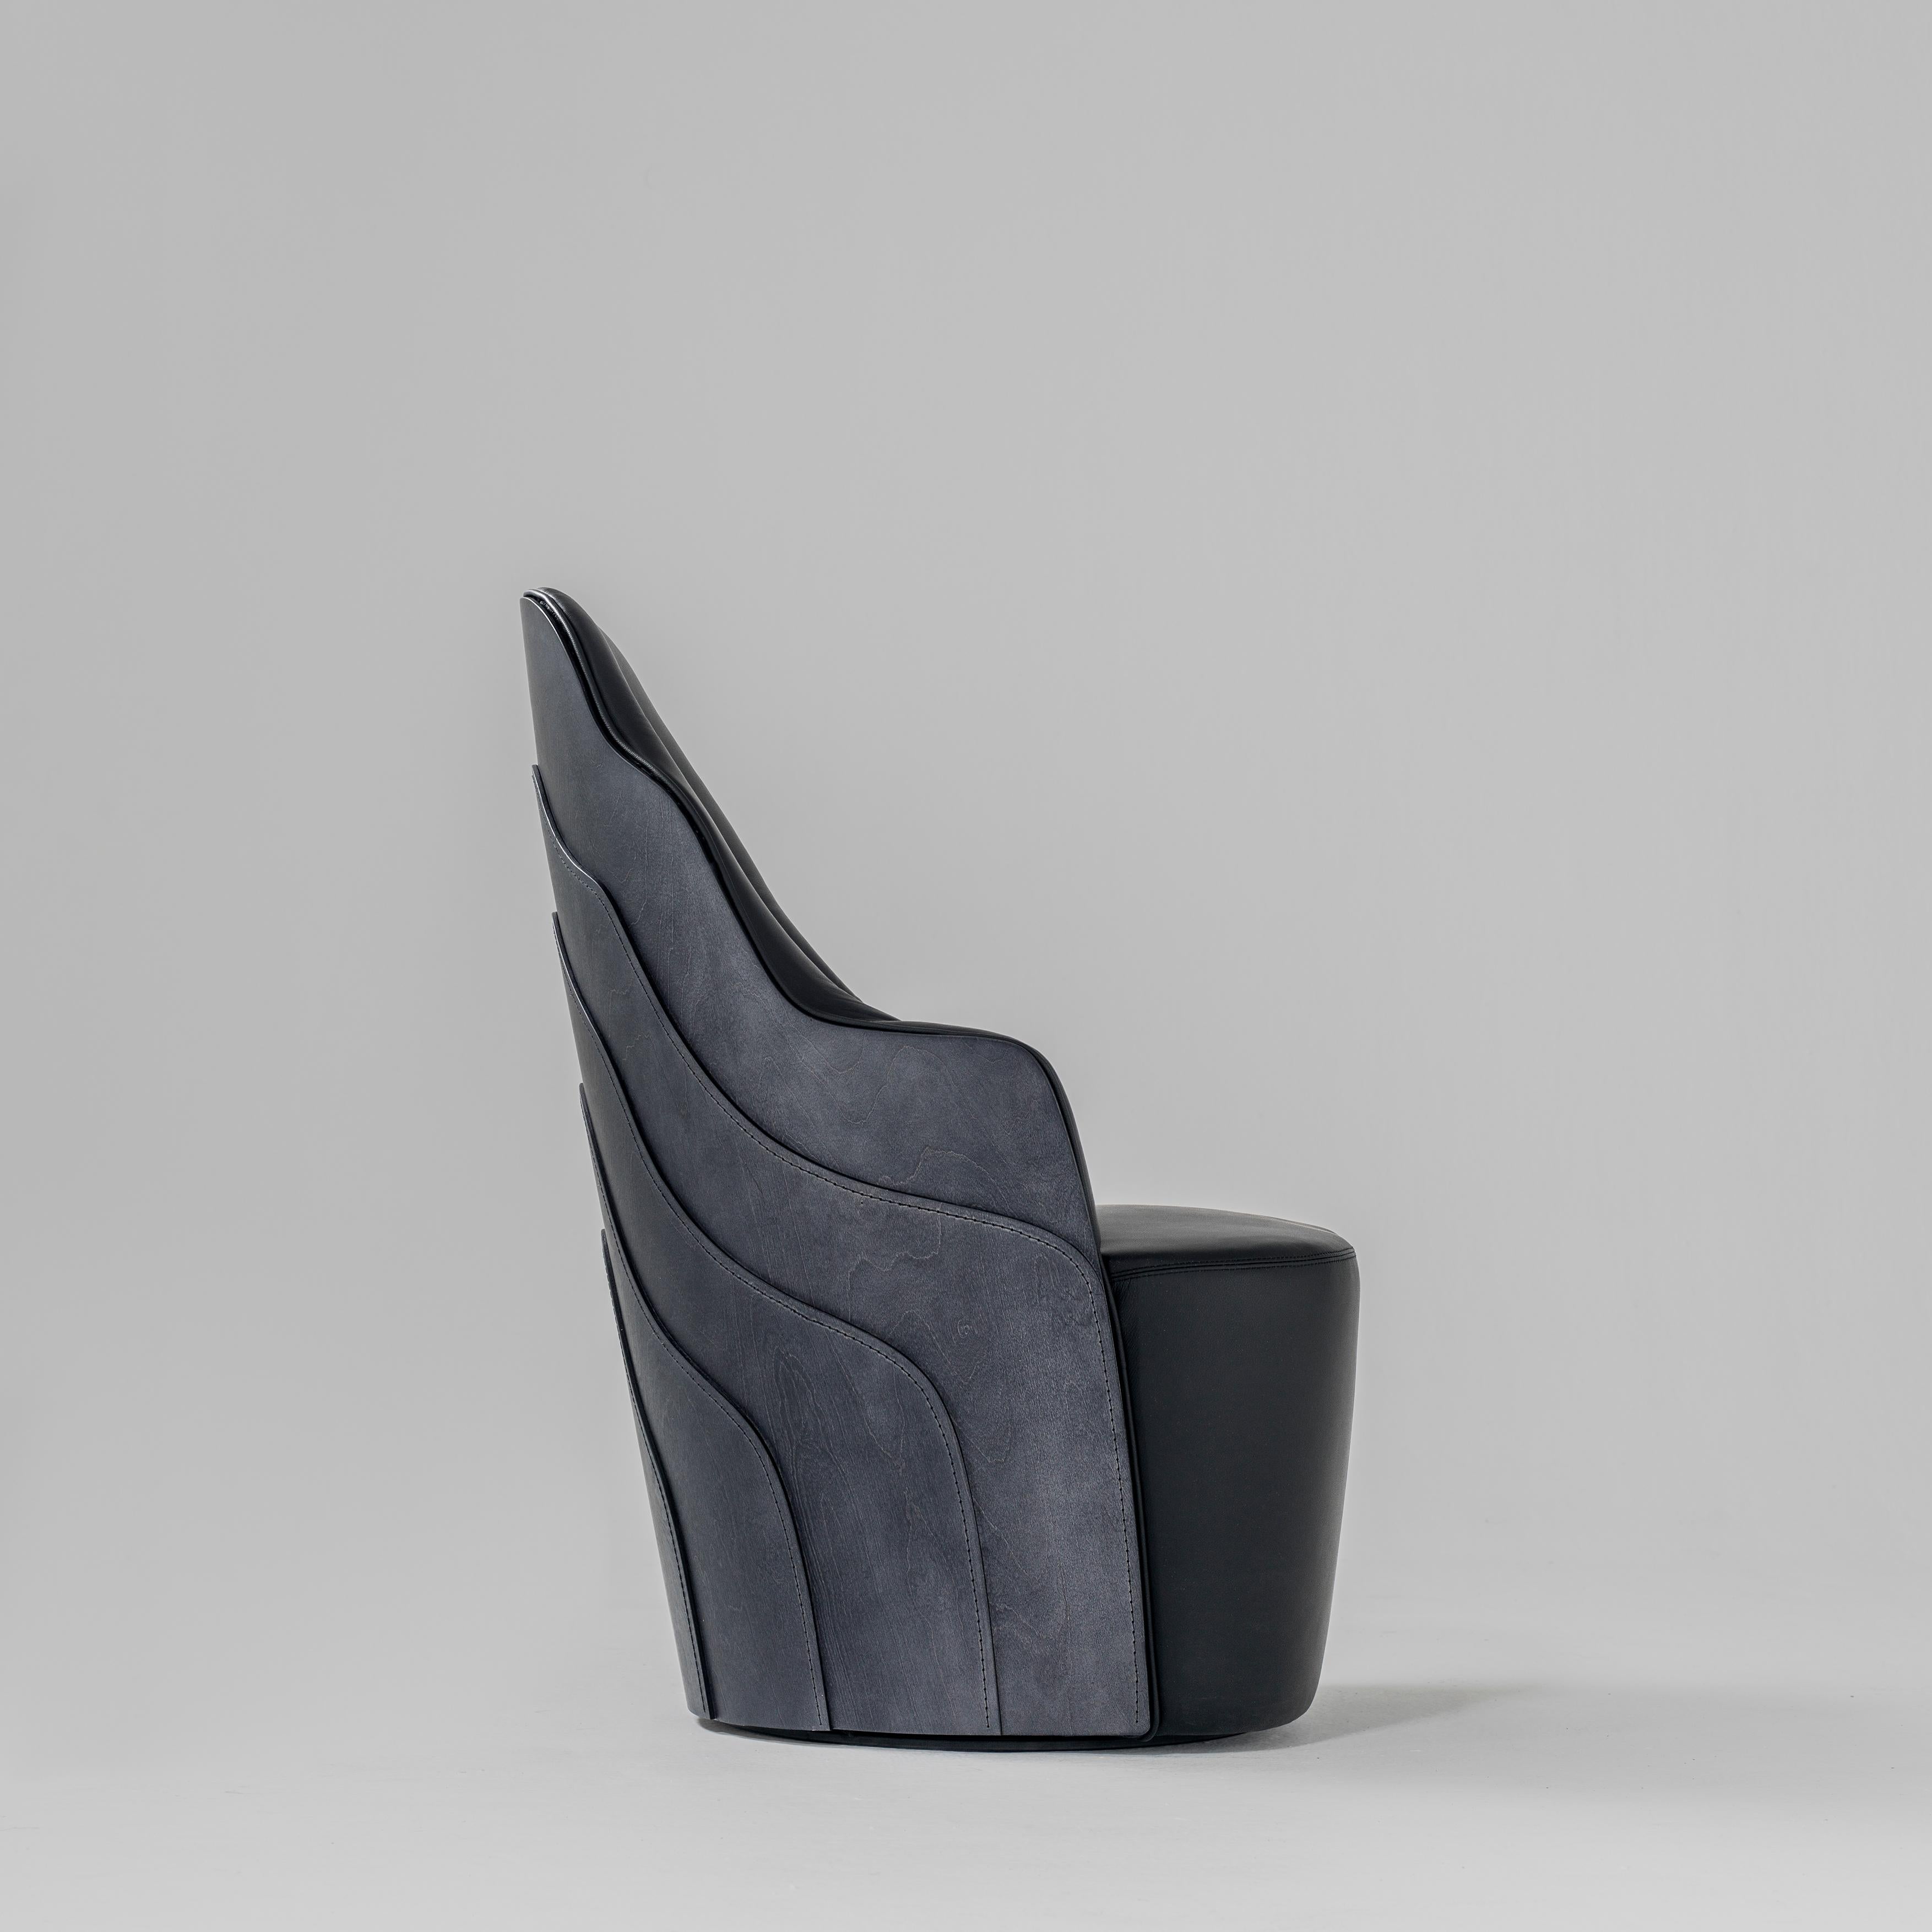 Spanish Couture Armchair by Färg & Blanche